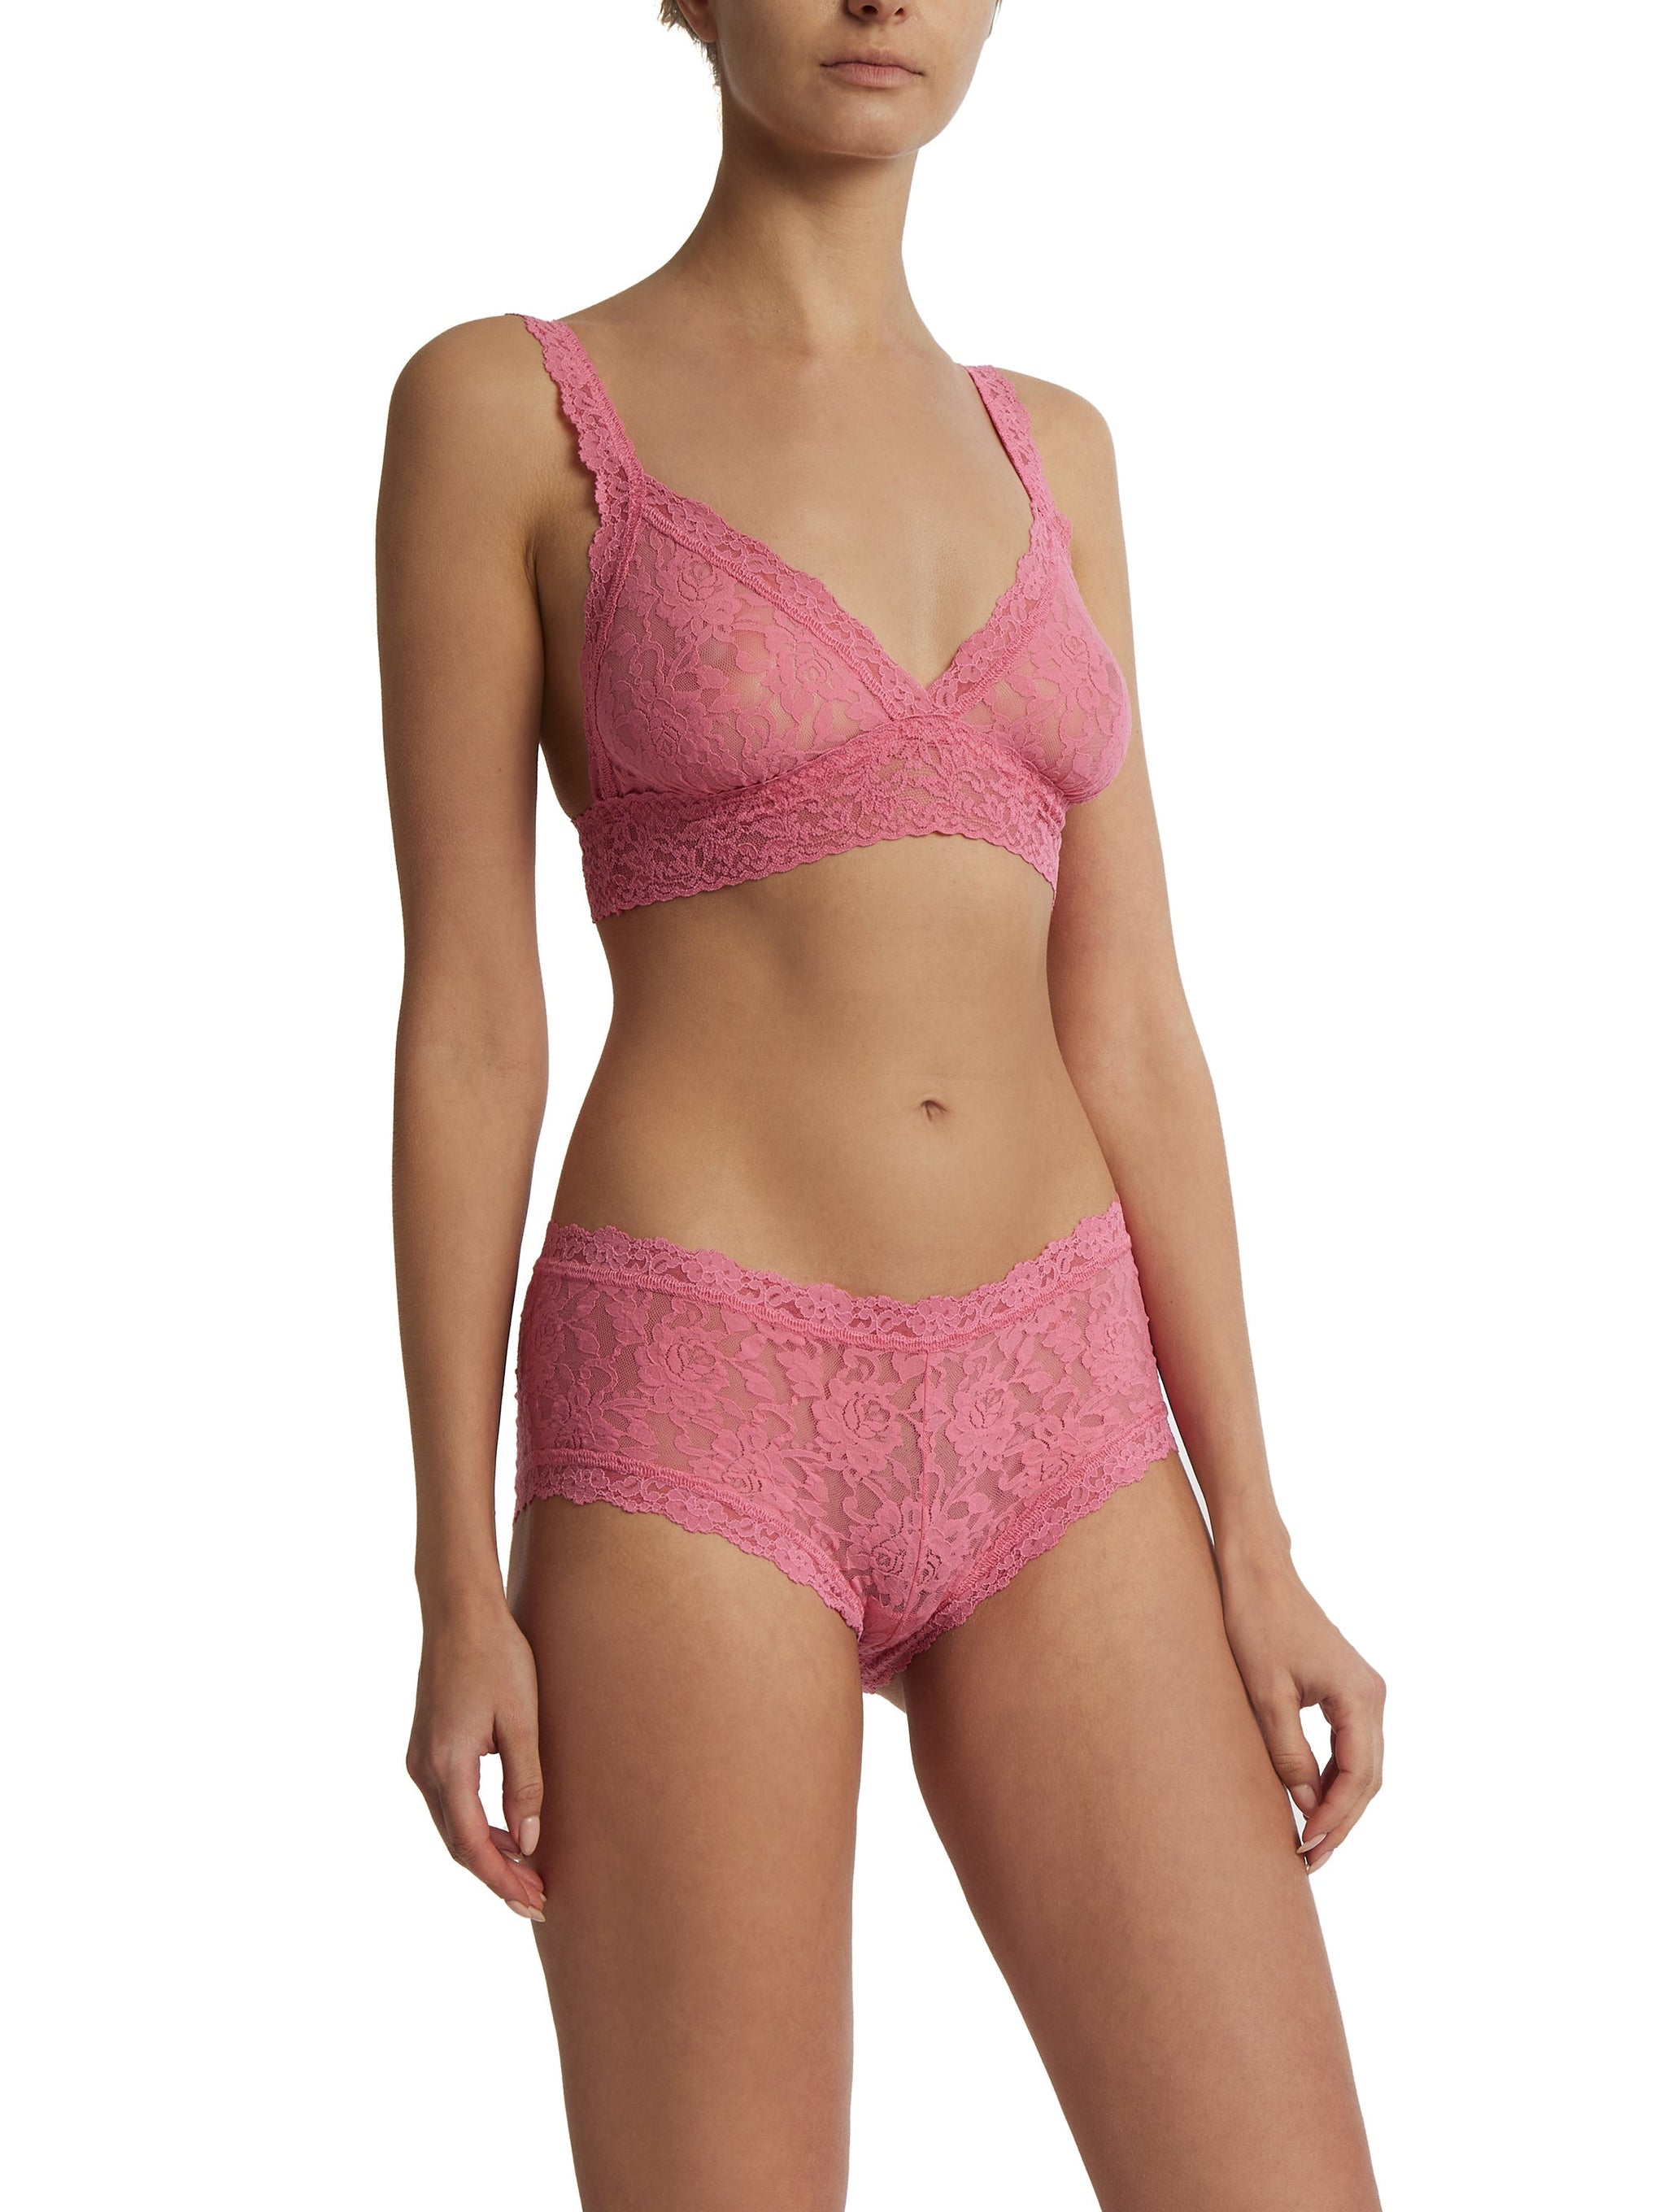 Hanky Panky - Signature Crossover Lace Bralette - Guava